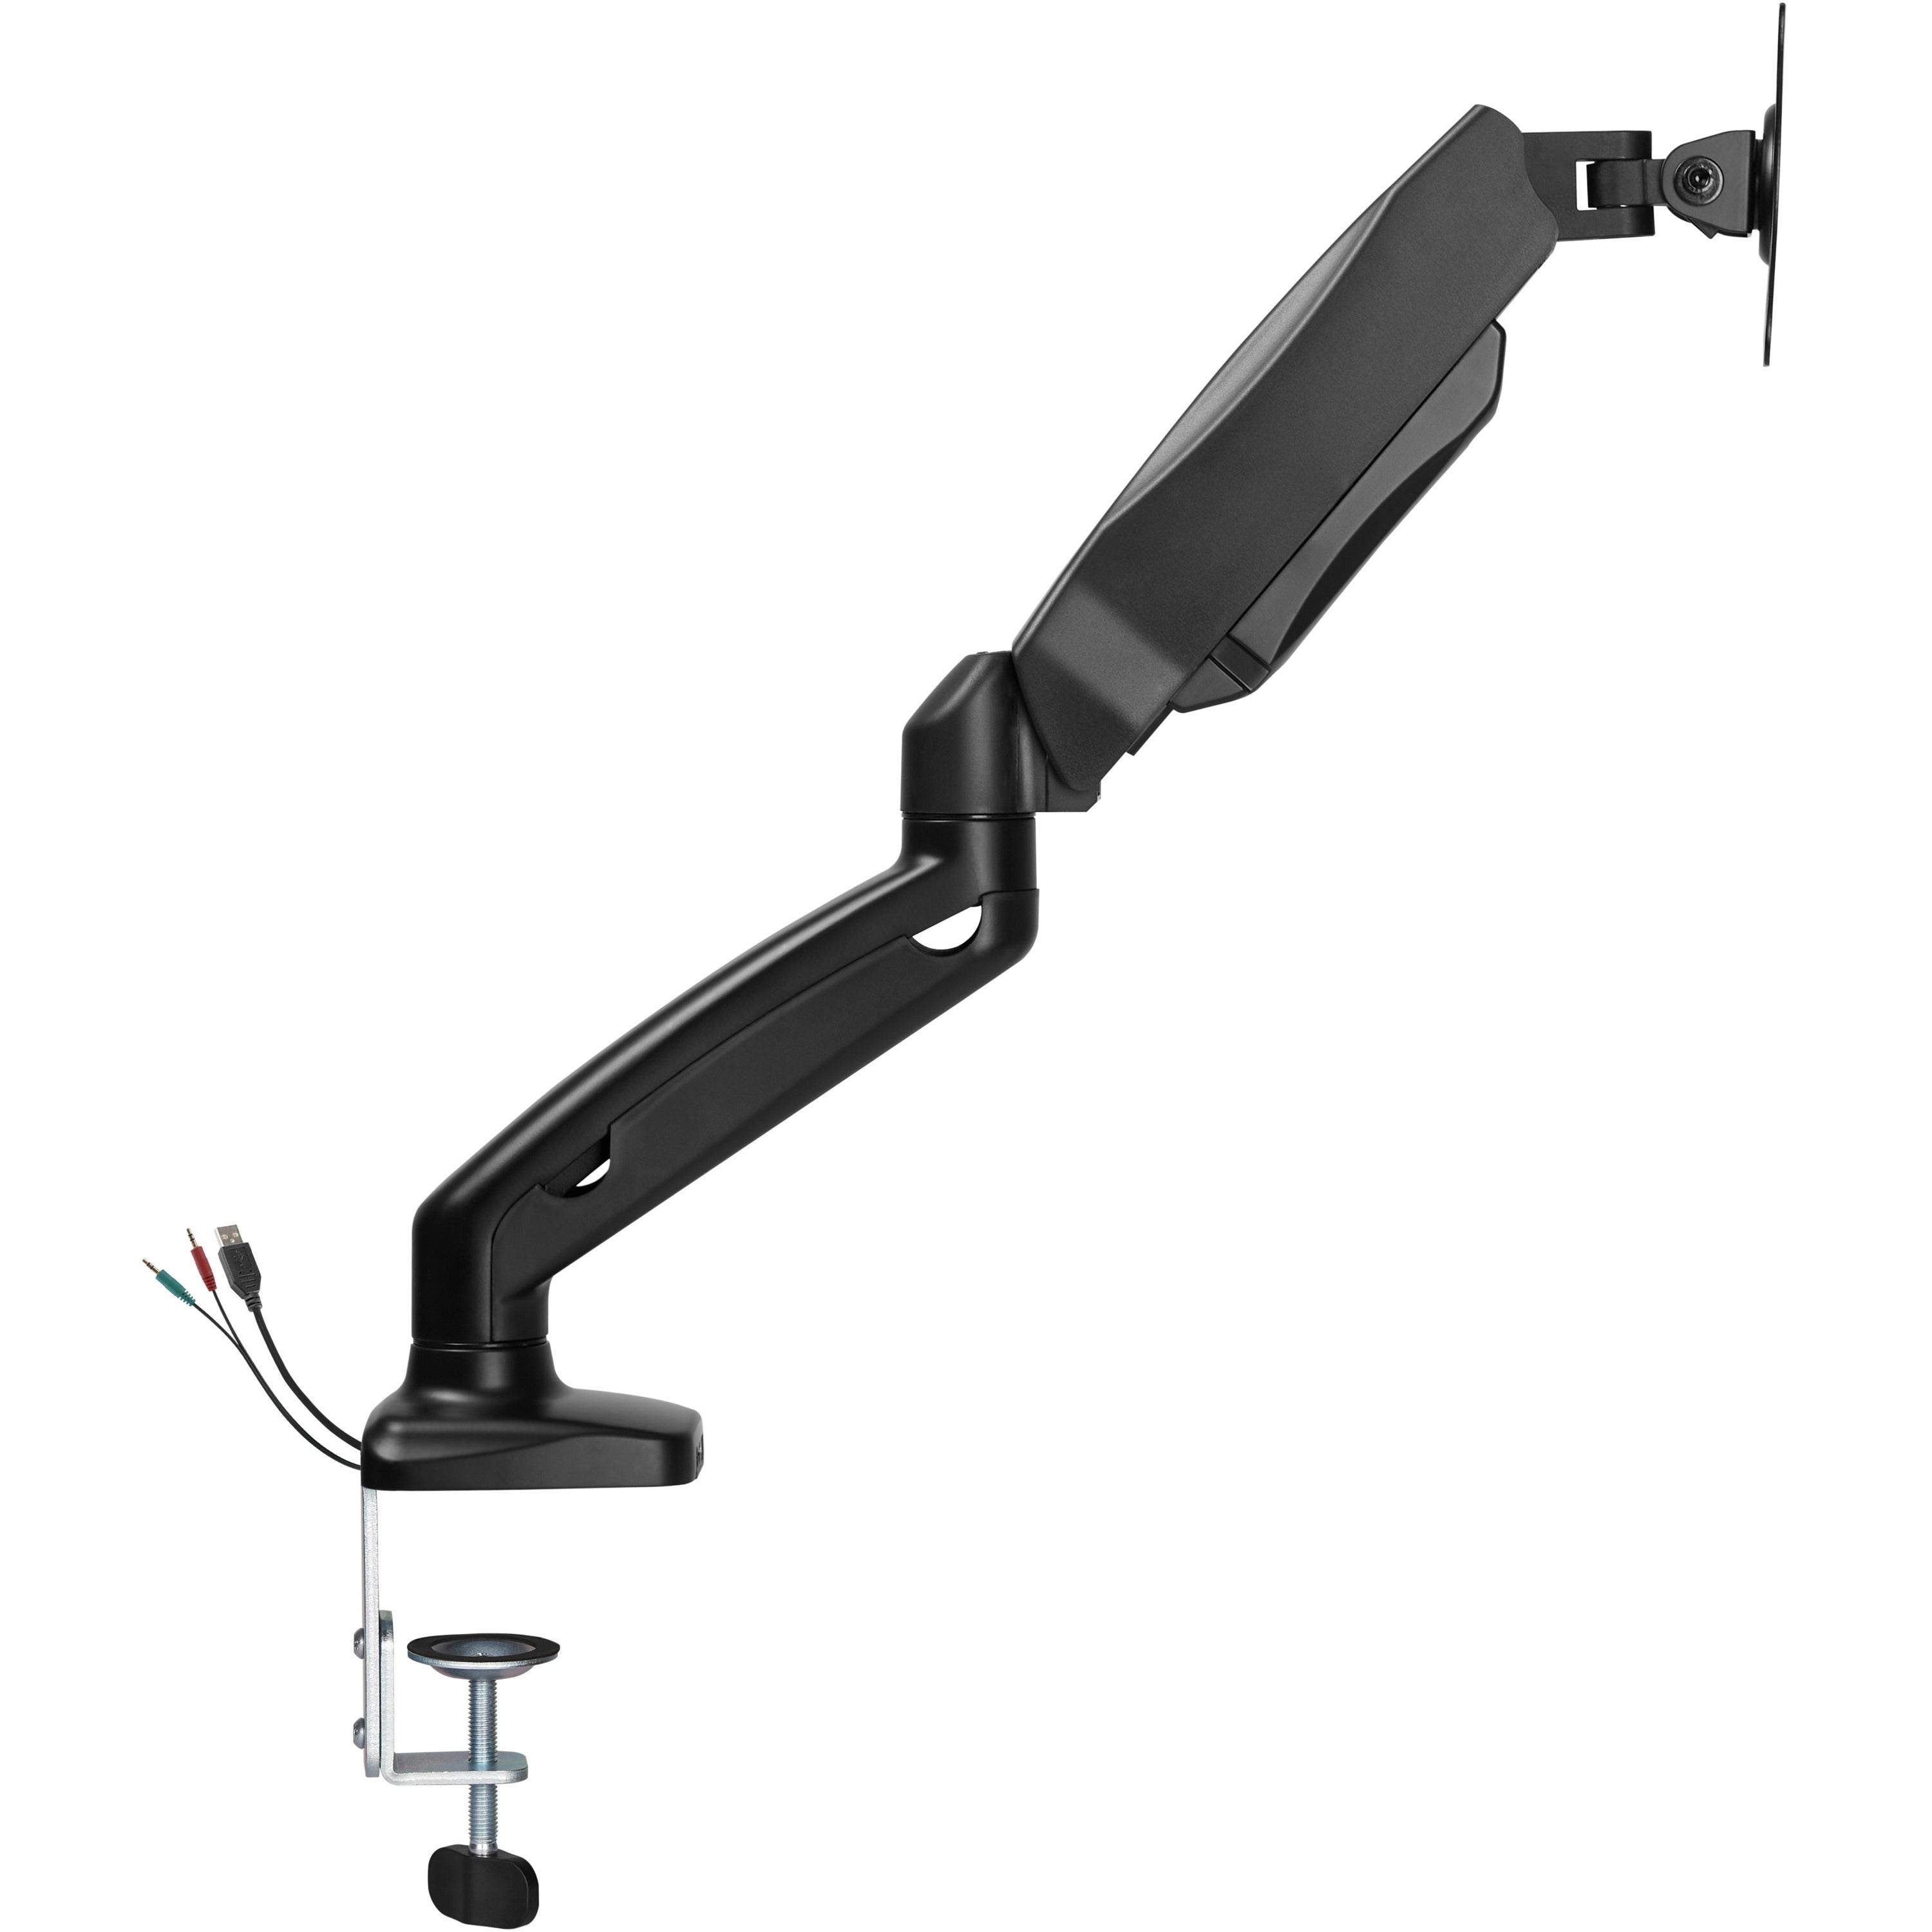 lorell-mounting-arm-for-monitor-black-height-adjustable-1-displays-supported-1430-lb-load-capacity-75-x-75-100-x-100-1-each_llr99800 - 5